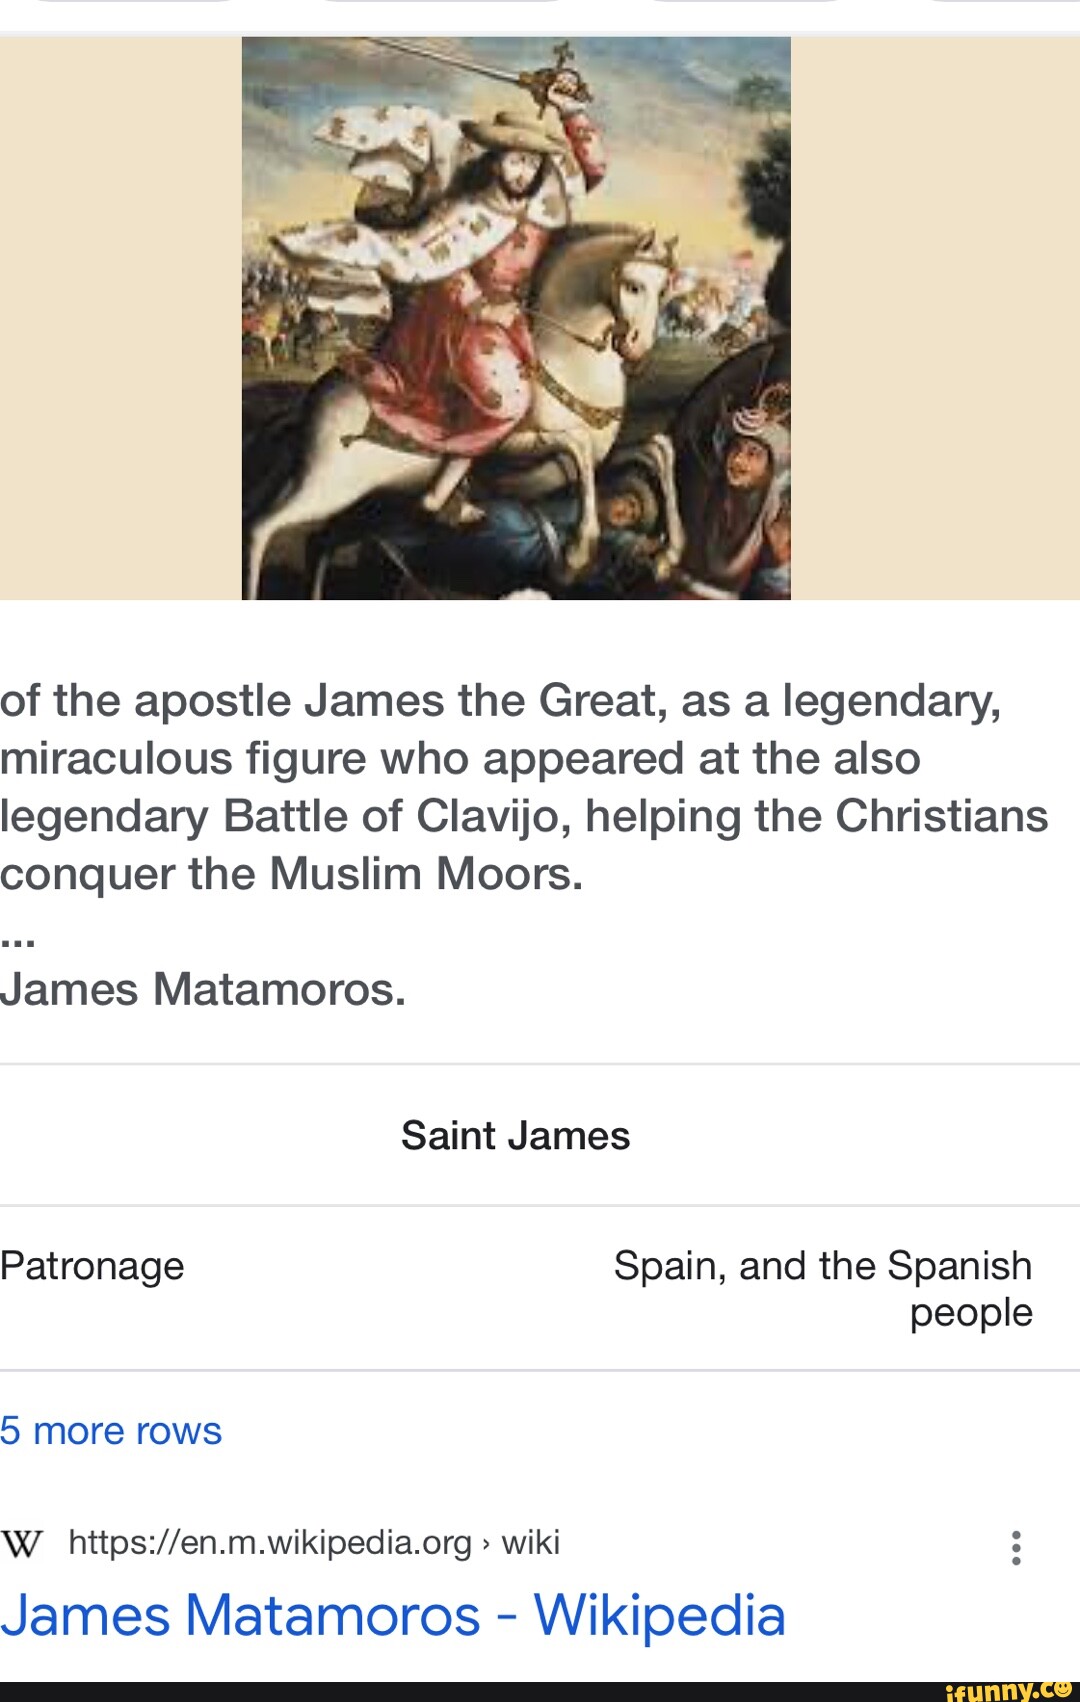 James the Great - Wikipedia